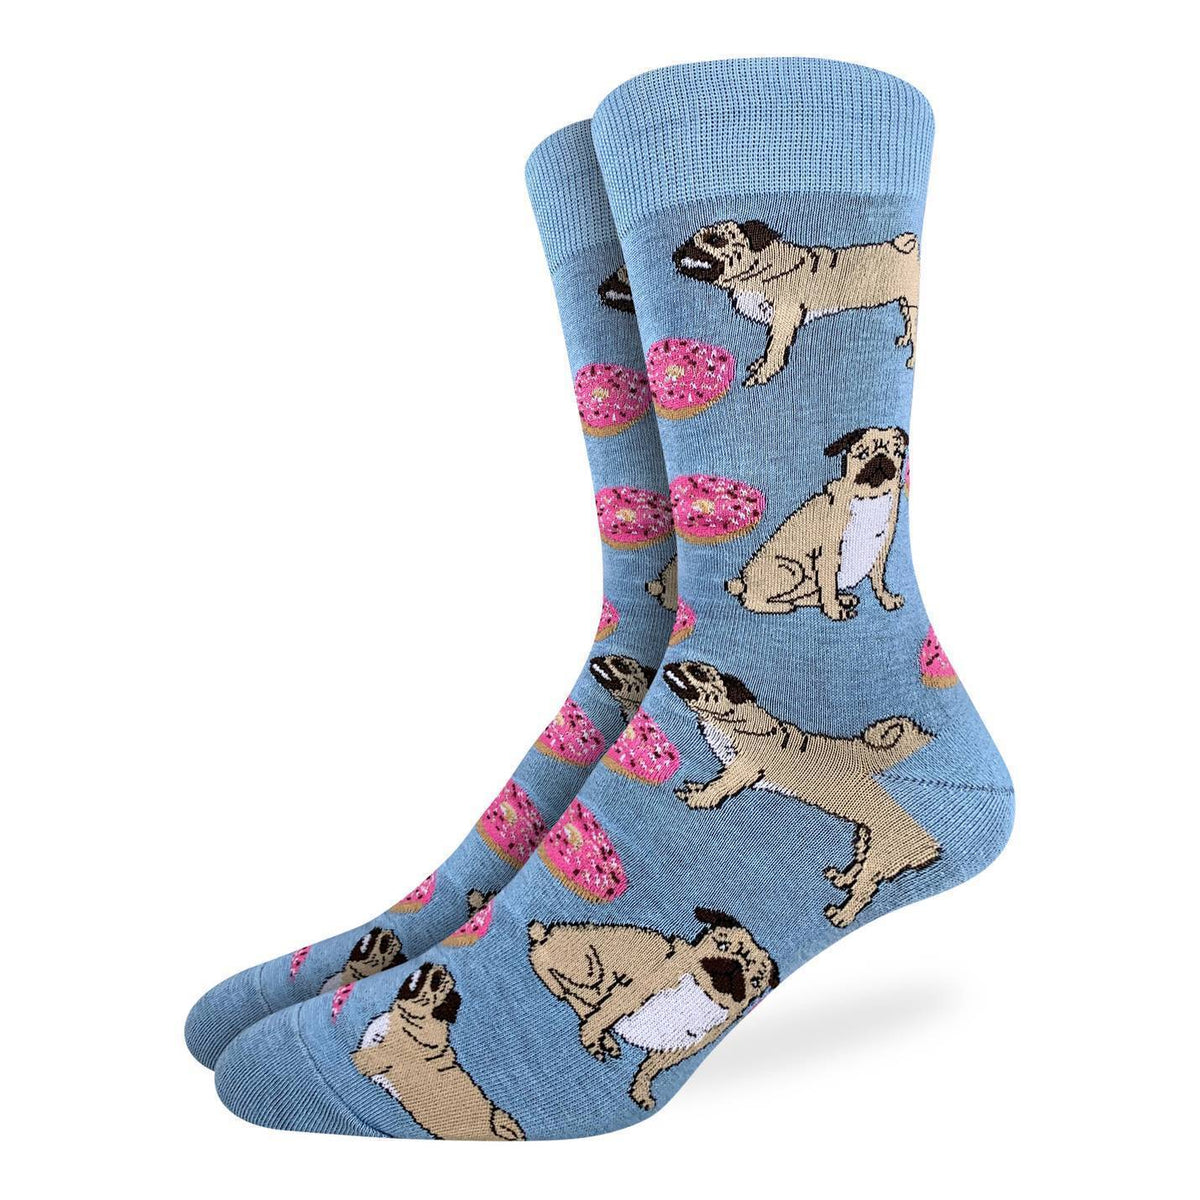 Men's Pugs and Donuts Socks